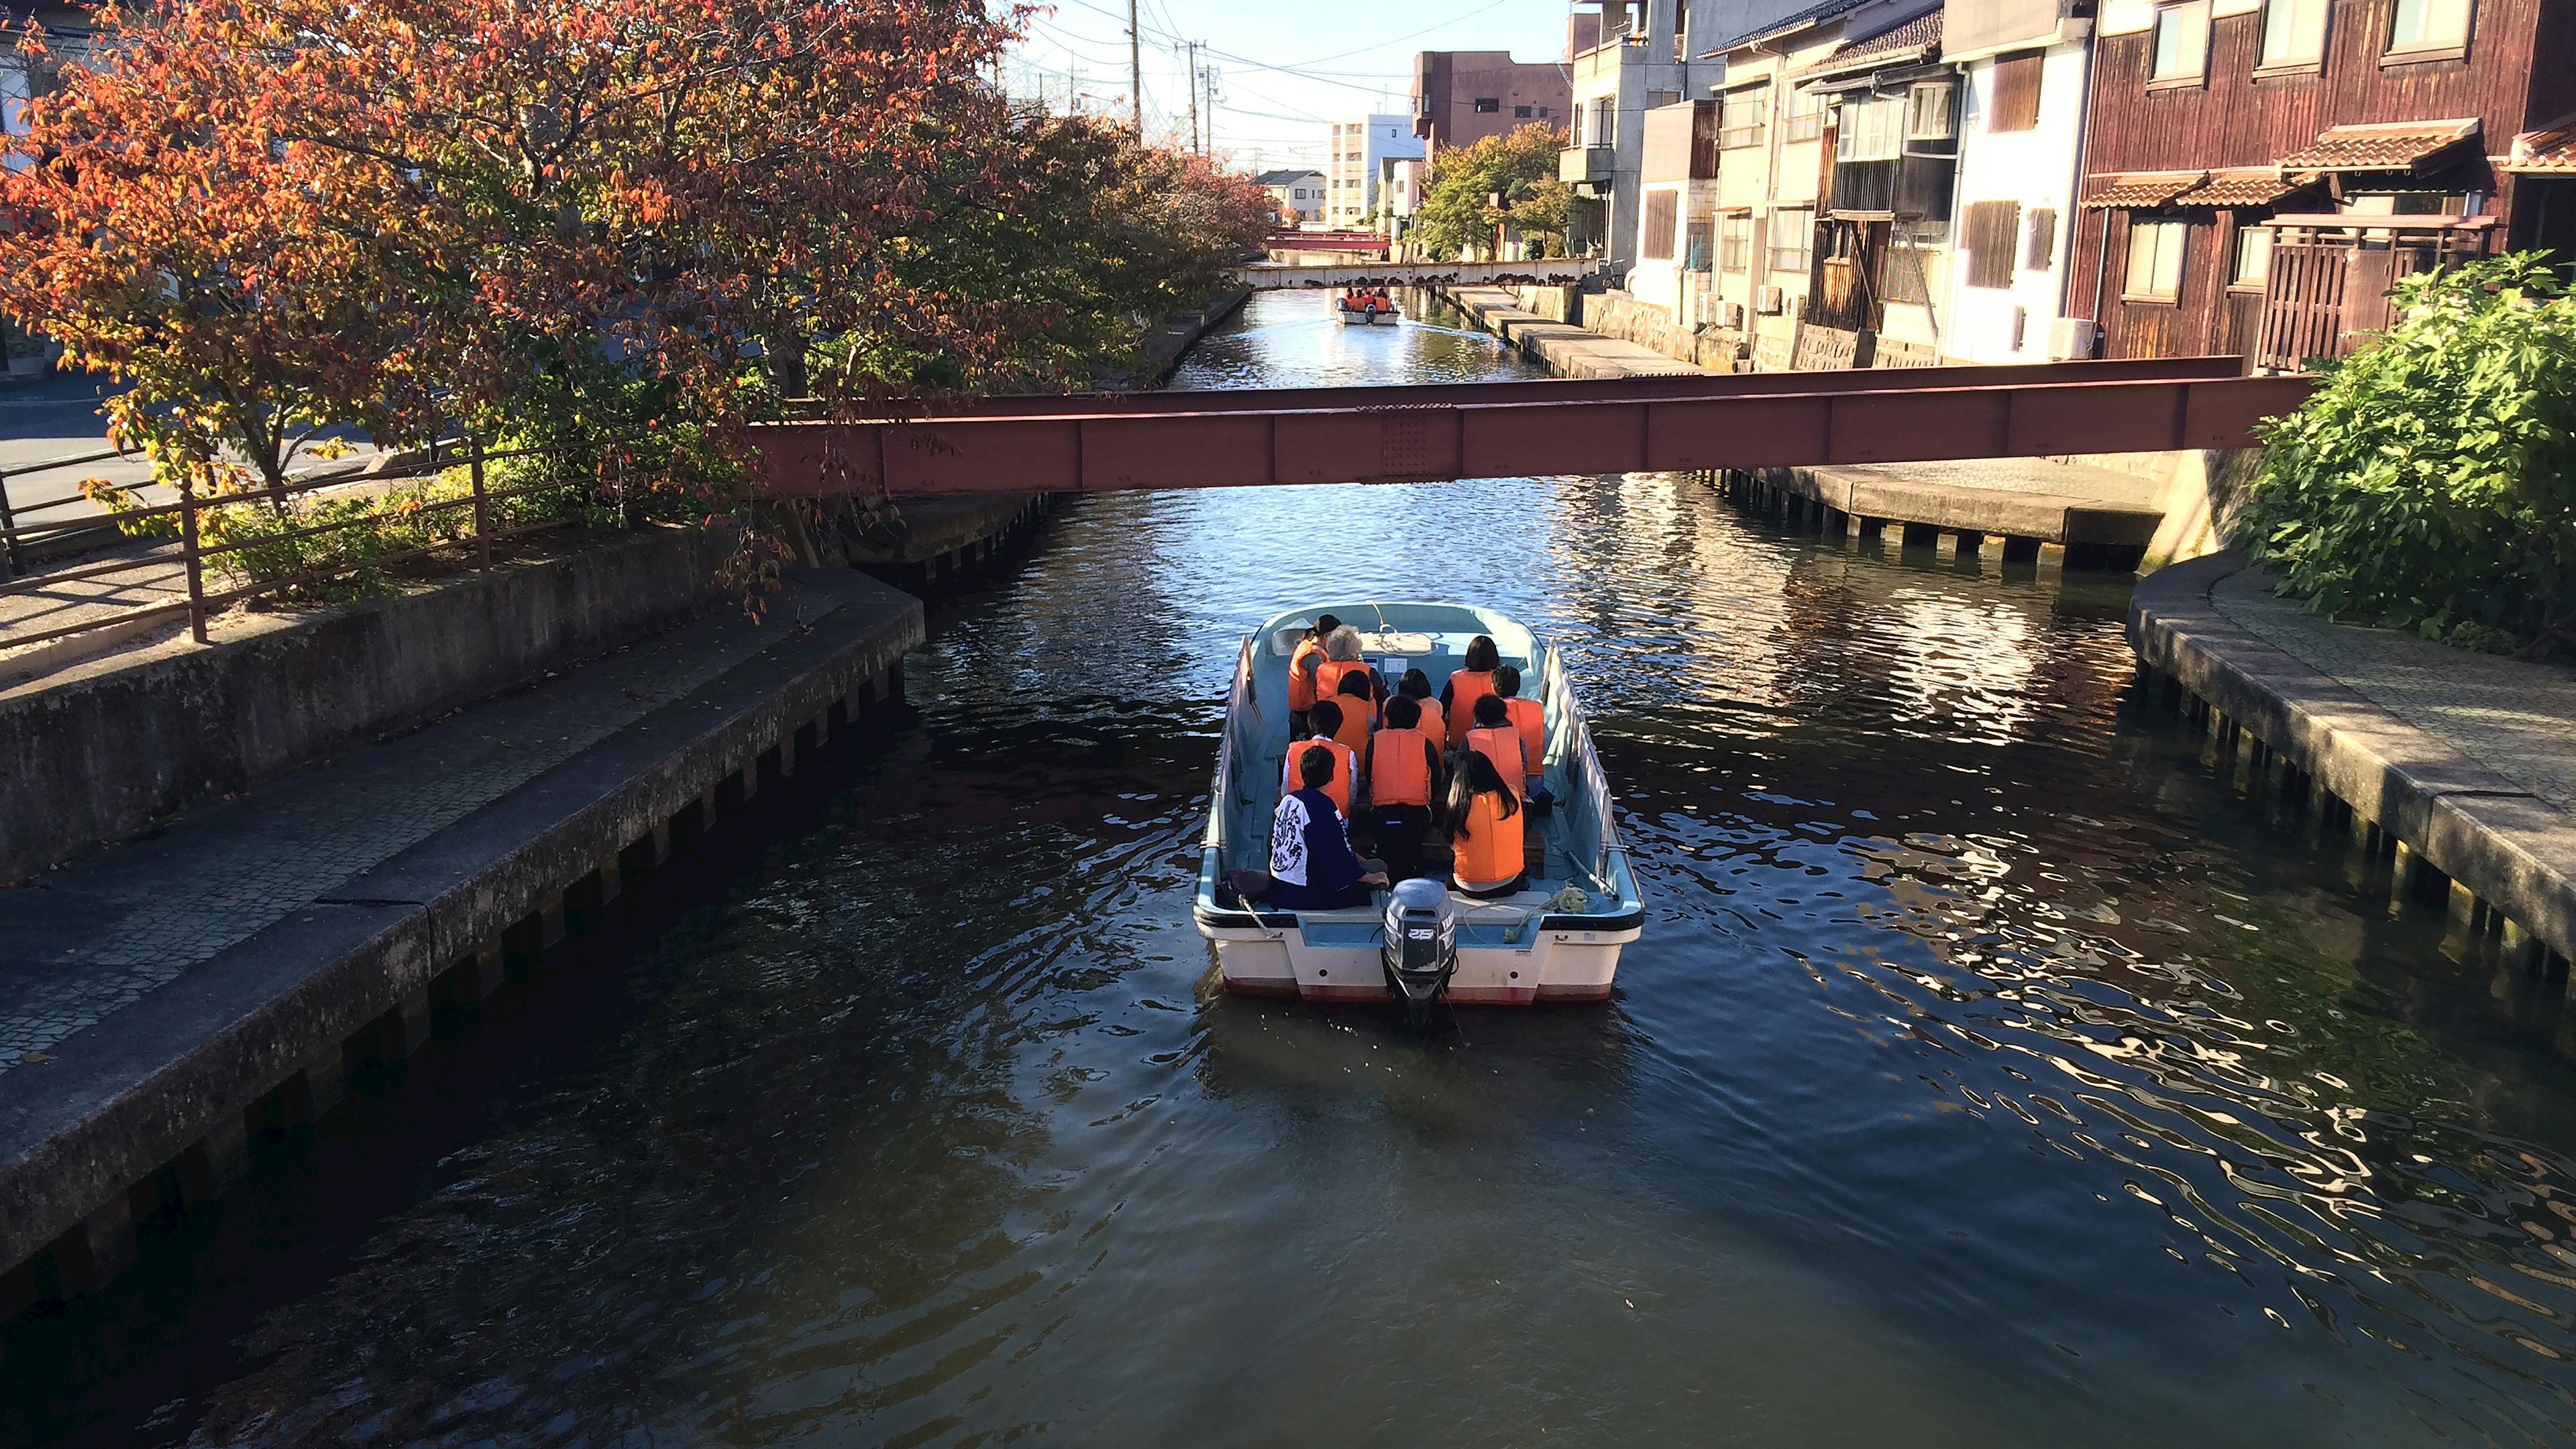 An erial view of a small white boat on a river that flows through the village. Ten people wearing orange life jackets and a person in a blue happi coat sit on the boat facing the front.